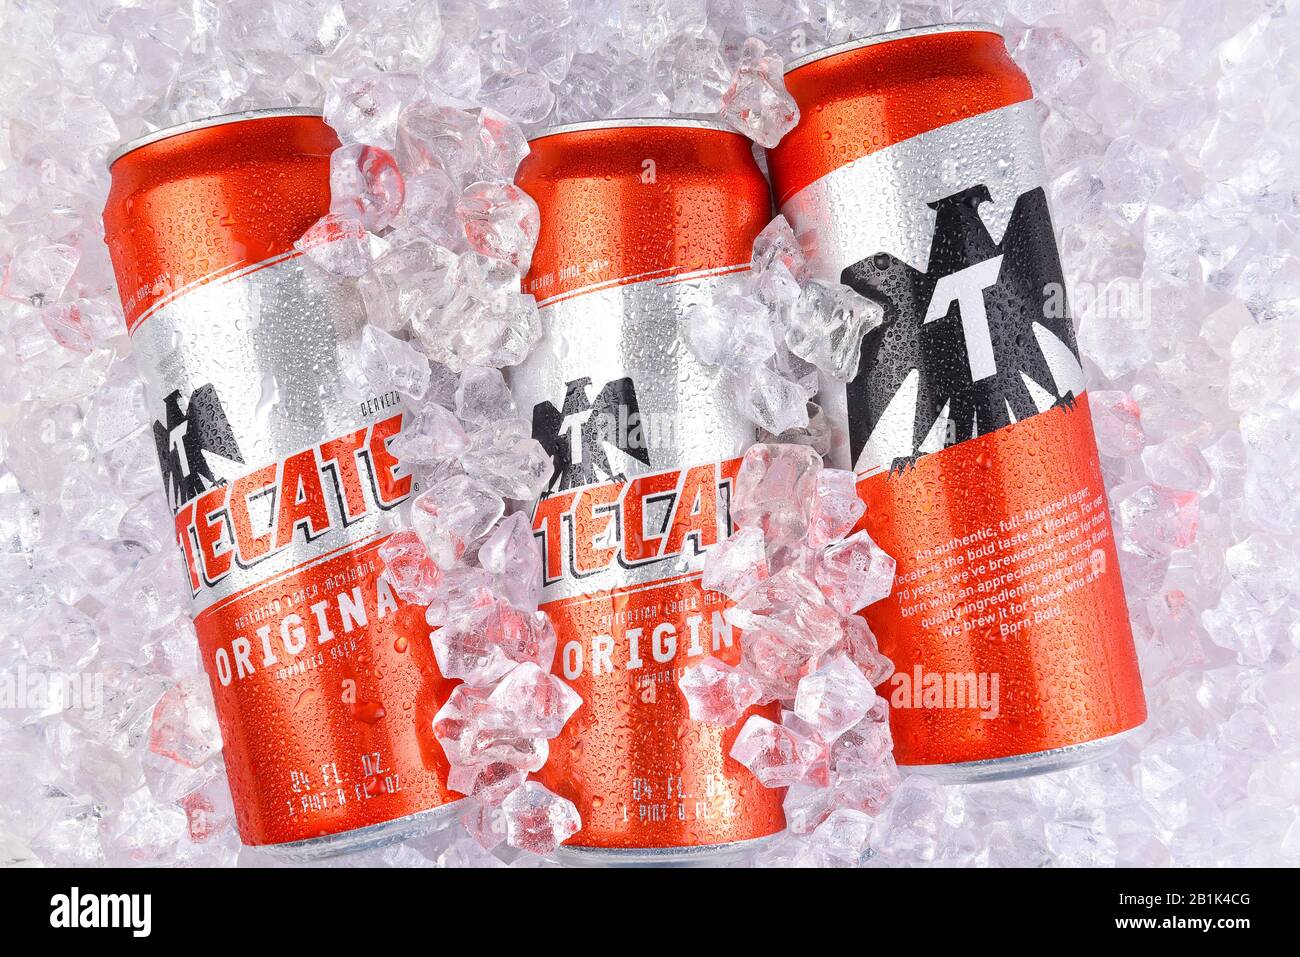 IRVINE, CALIFORNIA - MARCH 29, 2018: Three King Cans of Tecate Original beer in ice. Cuauhtemoc Moctezuma Brewery is a major brewer based in Monterrey Stock Photo